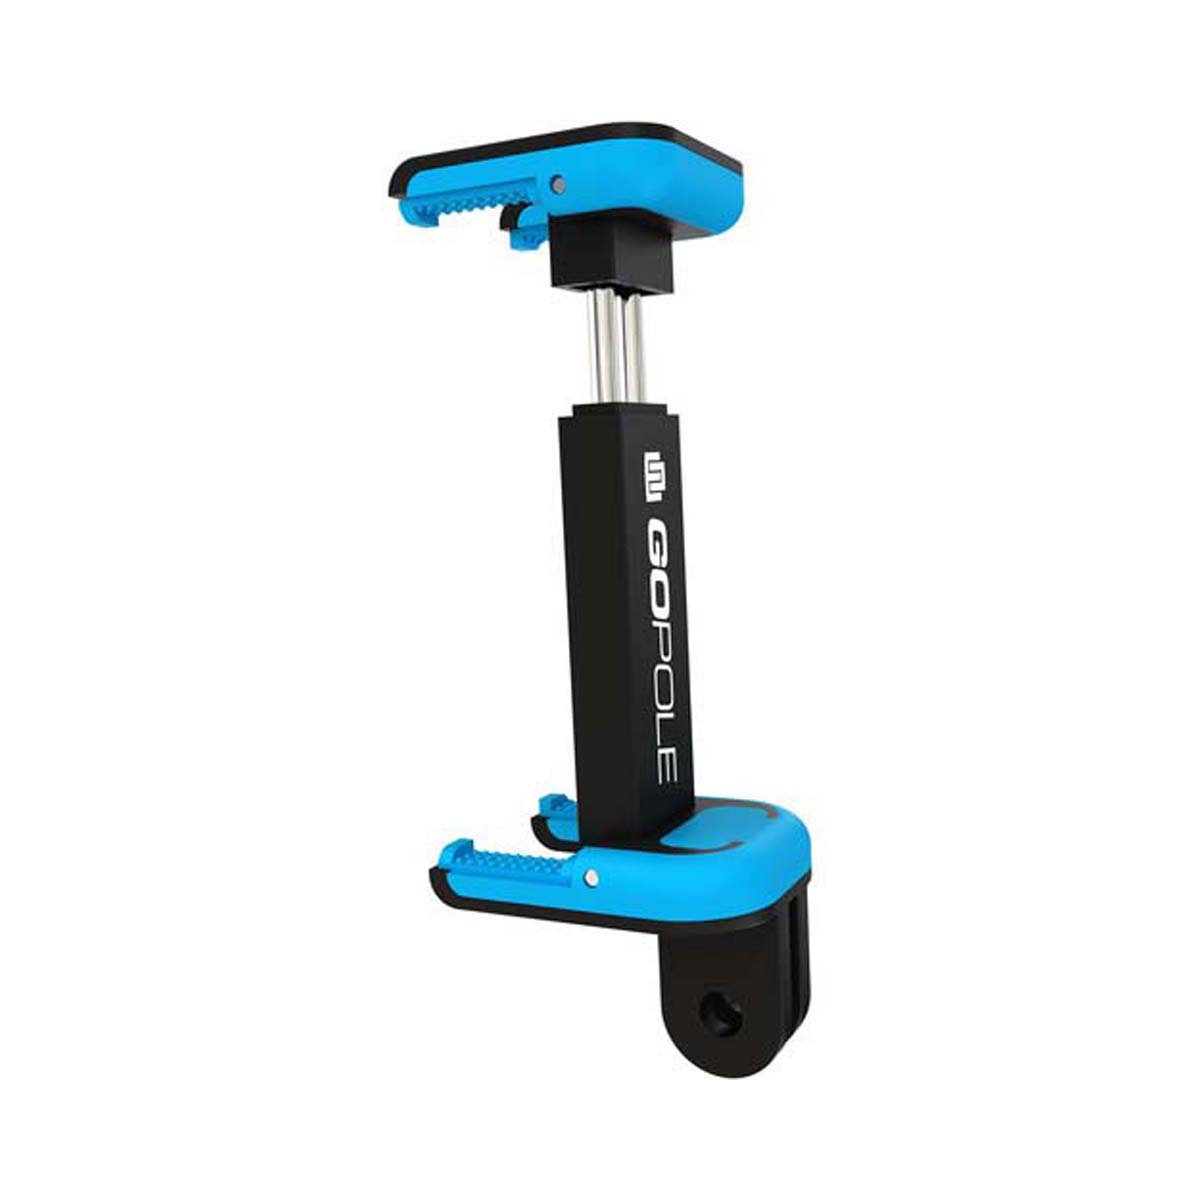 GoPole - GoPro to Mobile Adapter